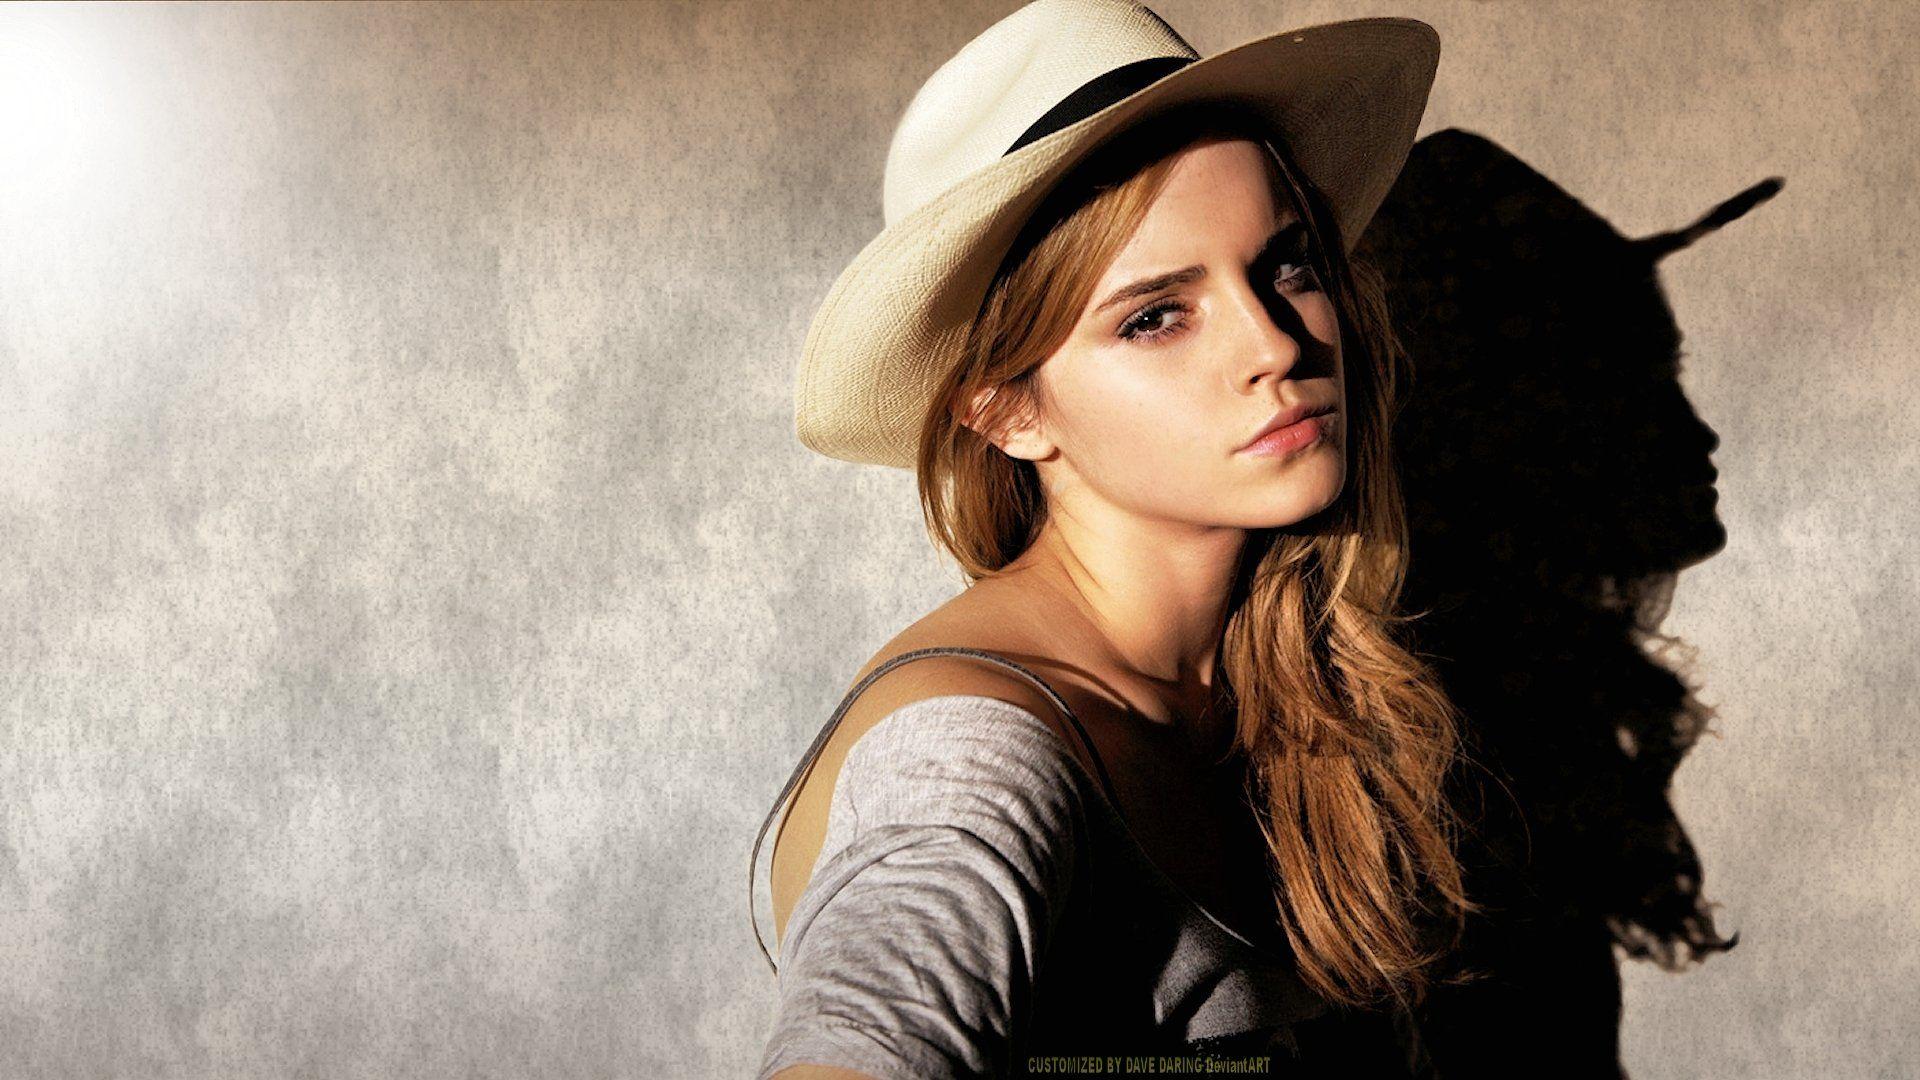 Wallpaper Image About Emma Watson On HD For Pc Descktop High